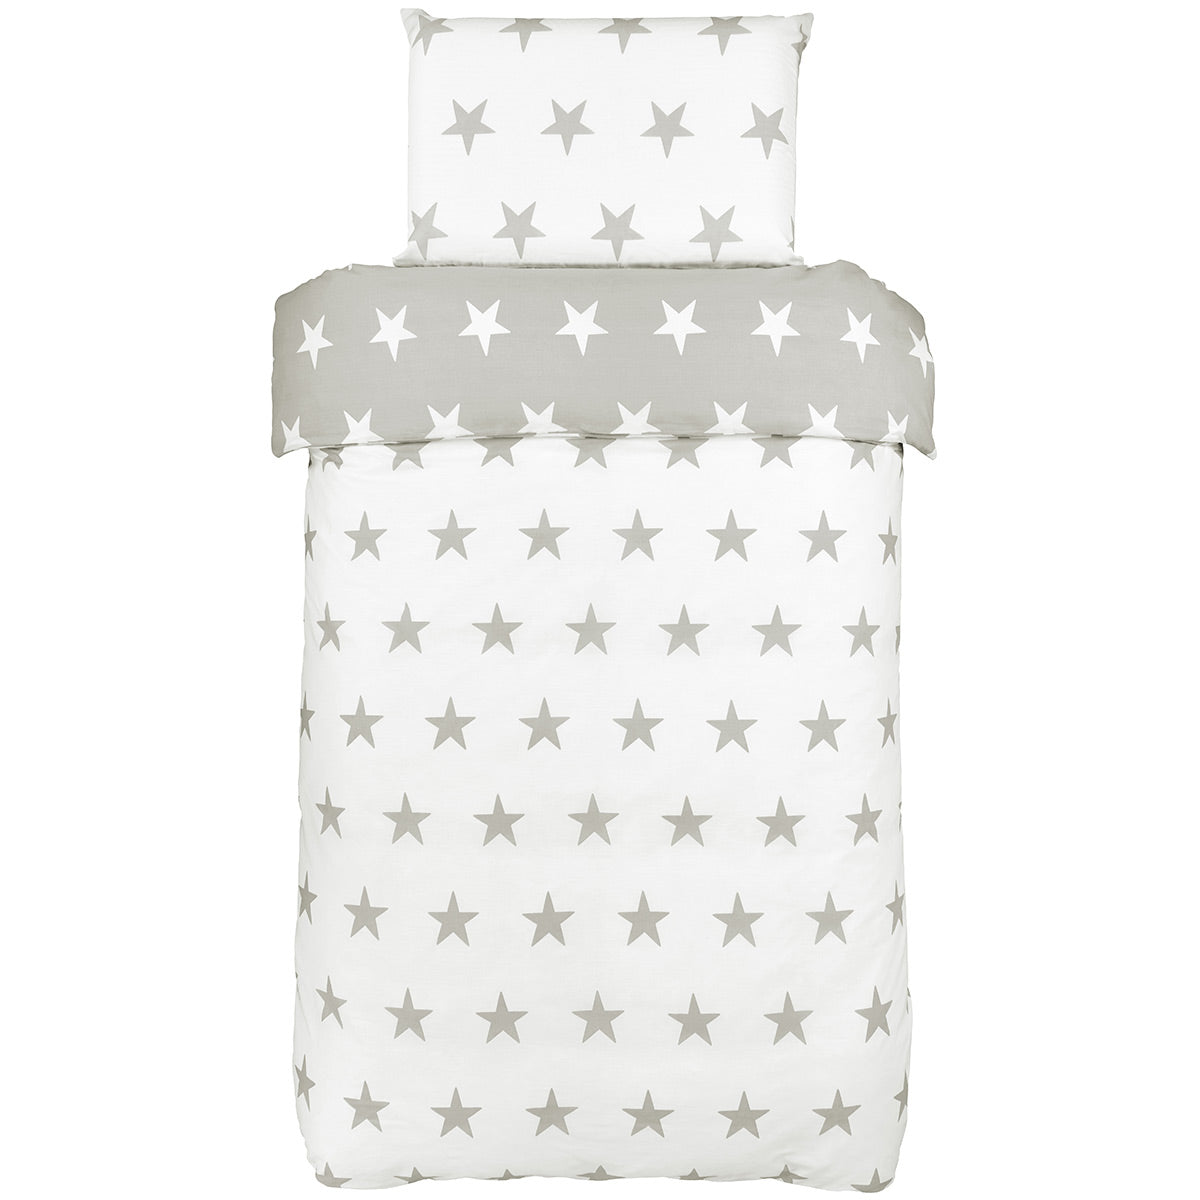 Bloomsbury Mill Grey & White Stars Cot Bed Duvet Cover